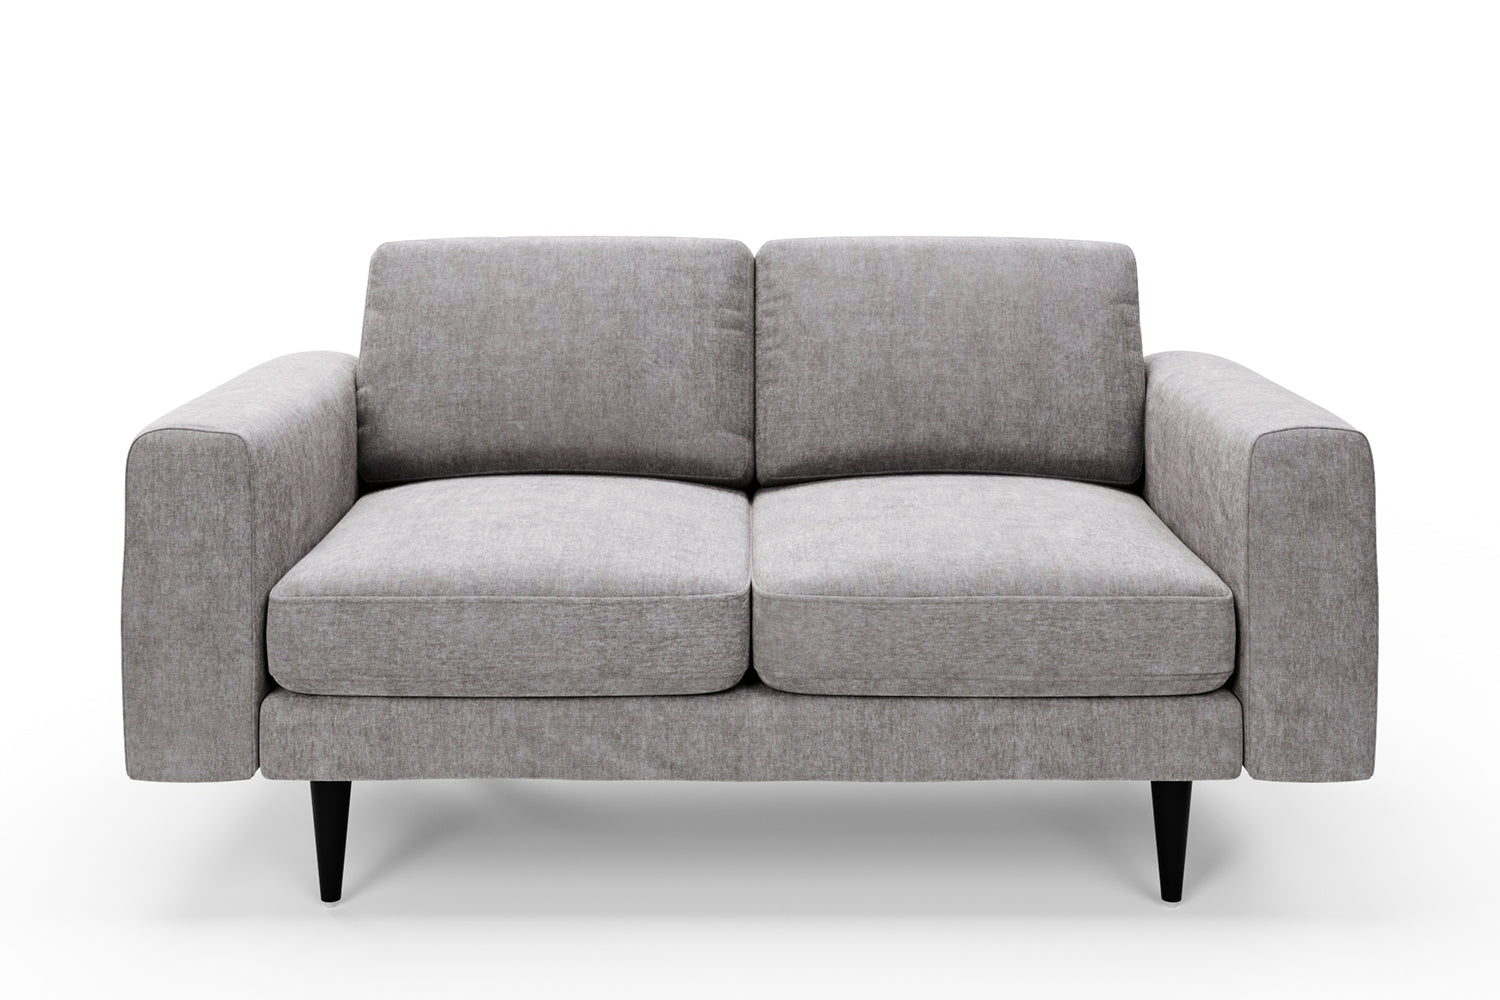 SNUG | The Big Chill 2 Seater Sofa in Mid Grey variant_40414877220912